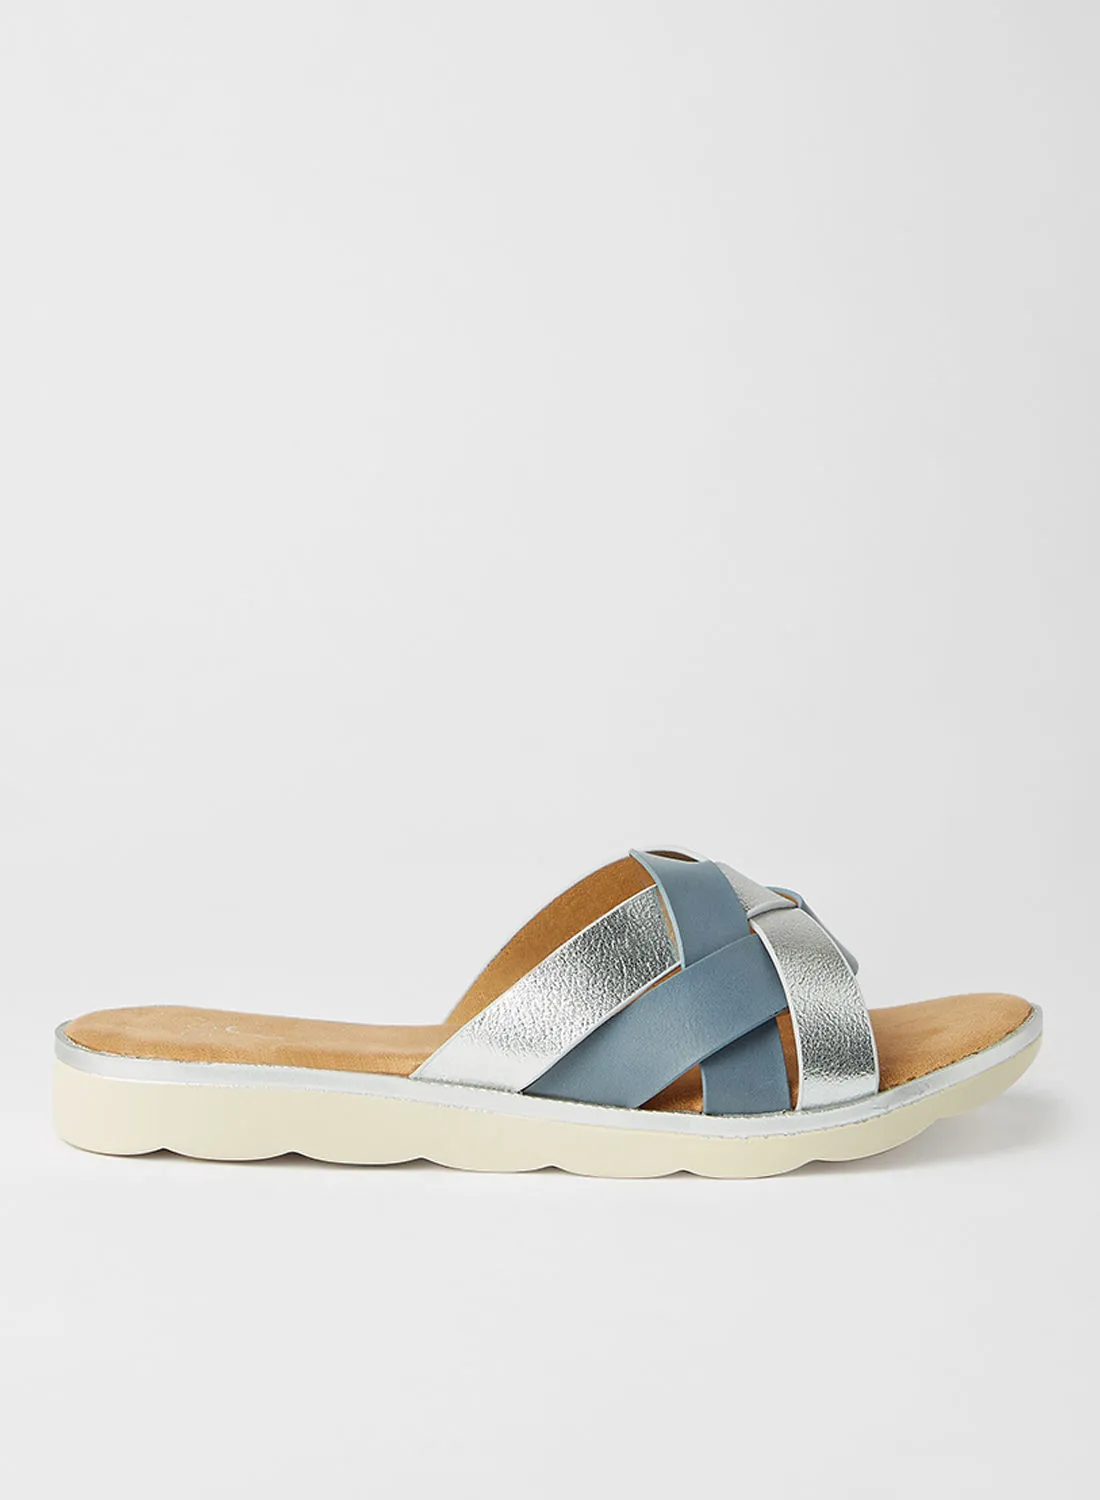 Jove Casual Slip-On Flat Sandals Blue/Silver